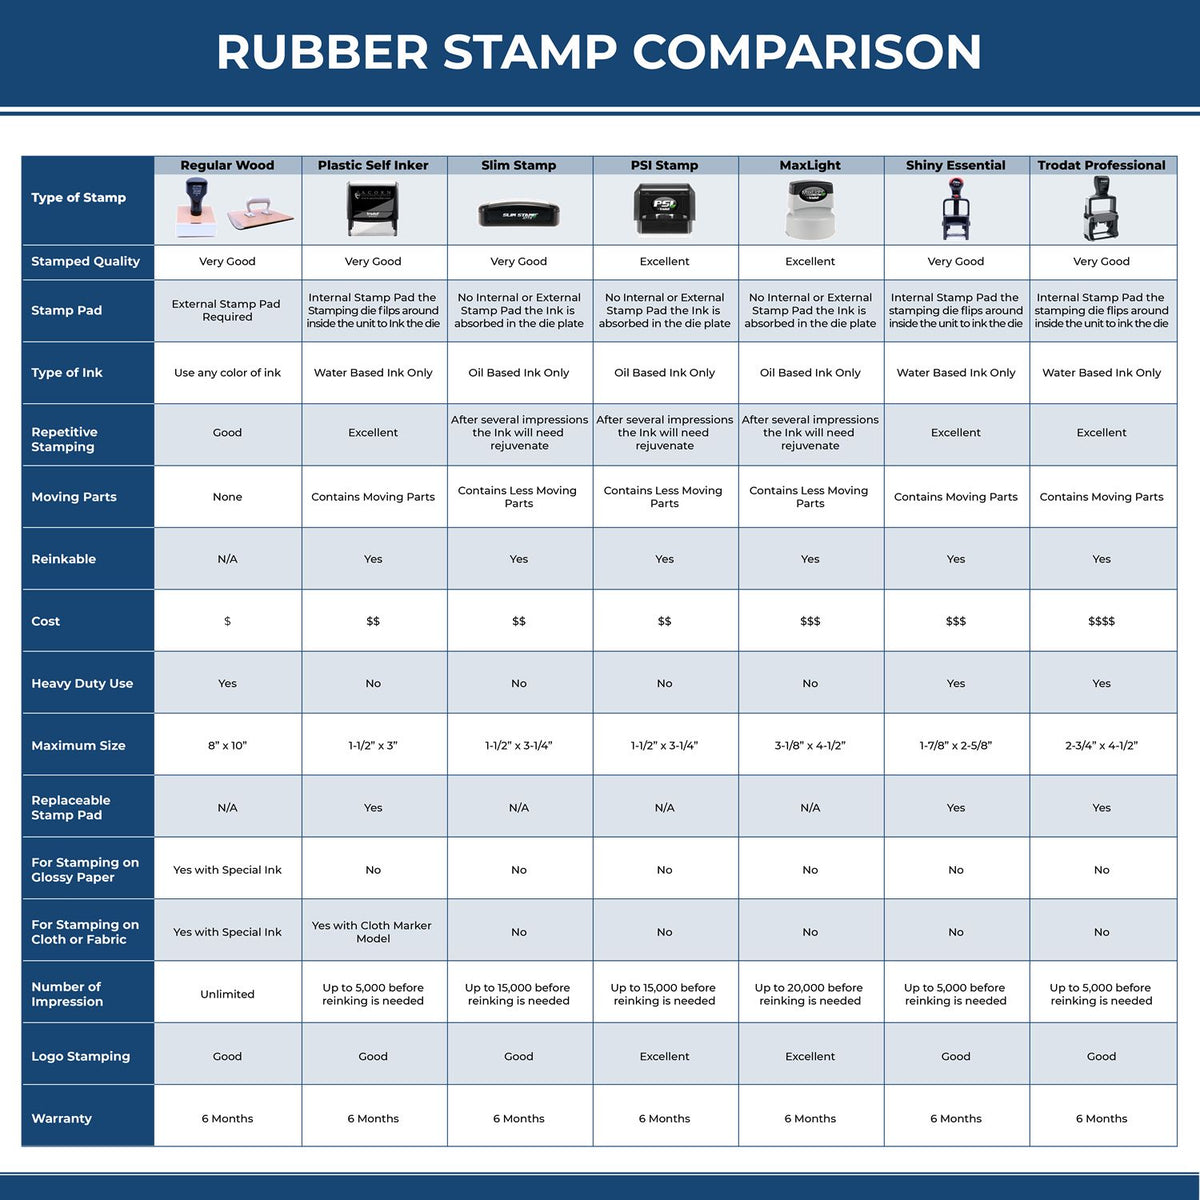 Large Dated Material Open Immediately Rubber Stamp 5632R Rubber Stamp Comparison